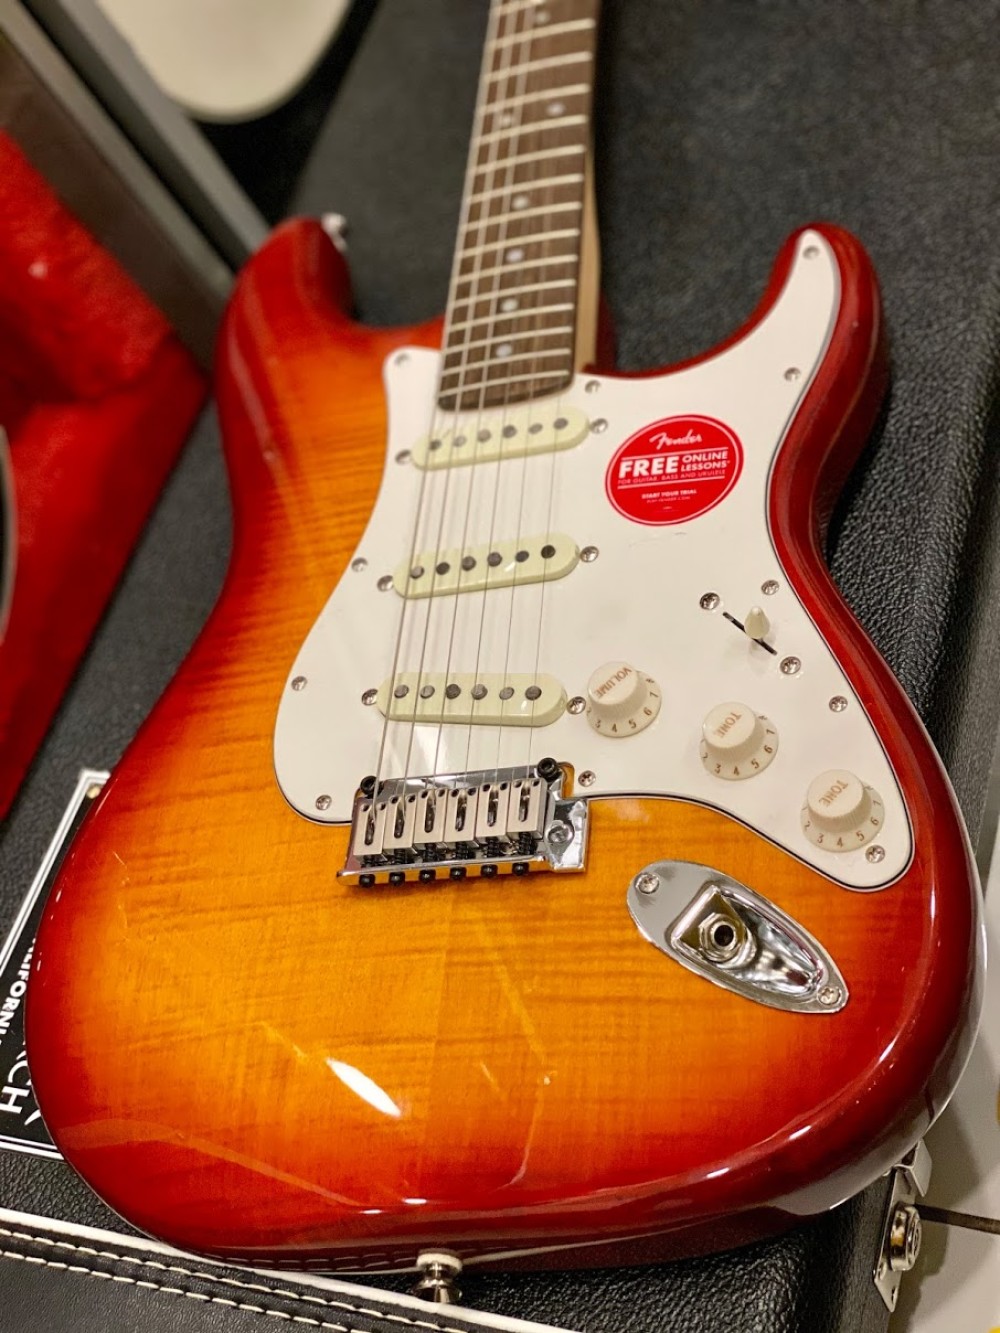 ■Squier Fender Stratocaster Flame Maple